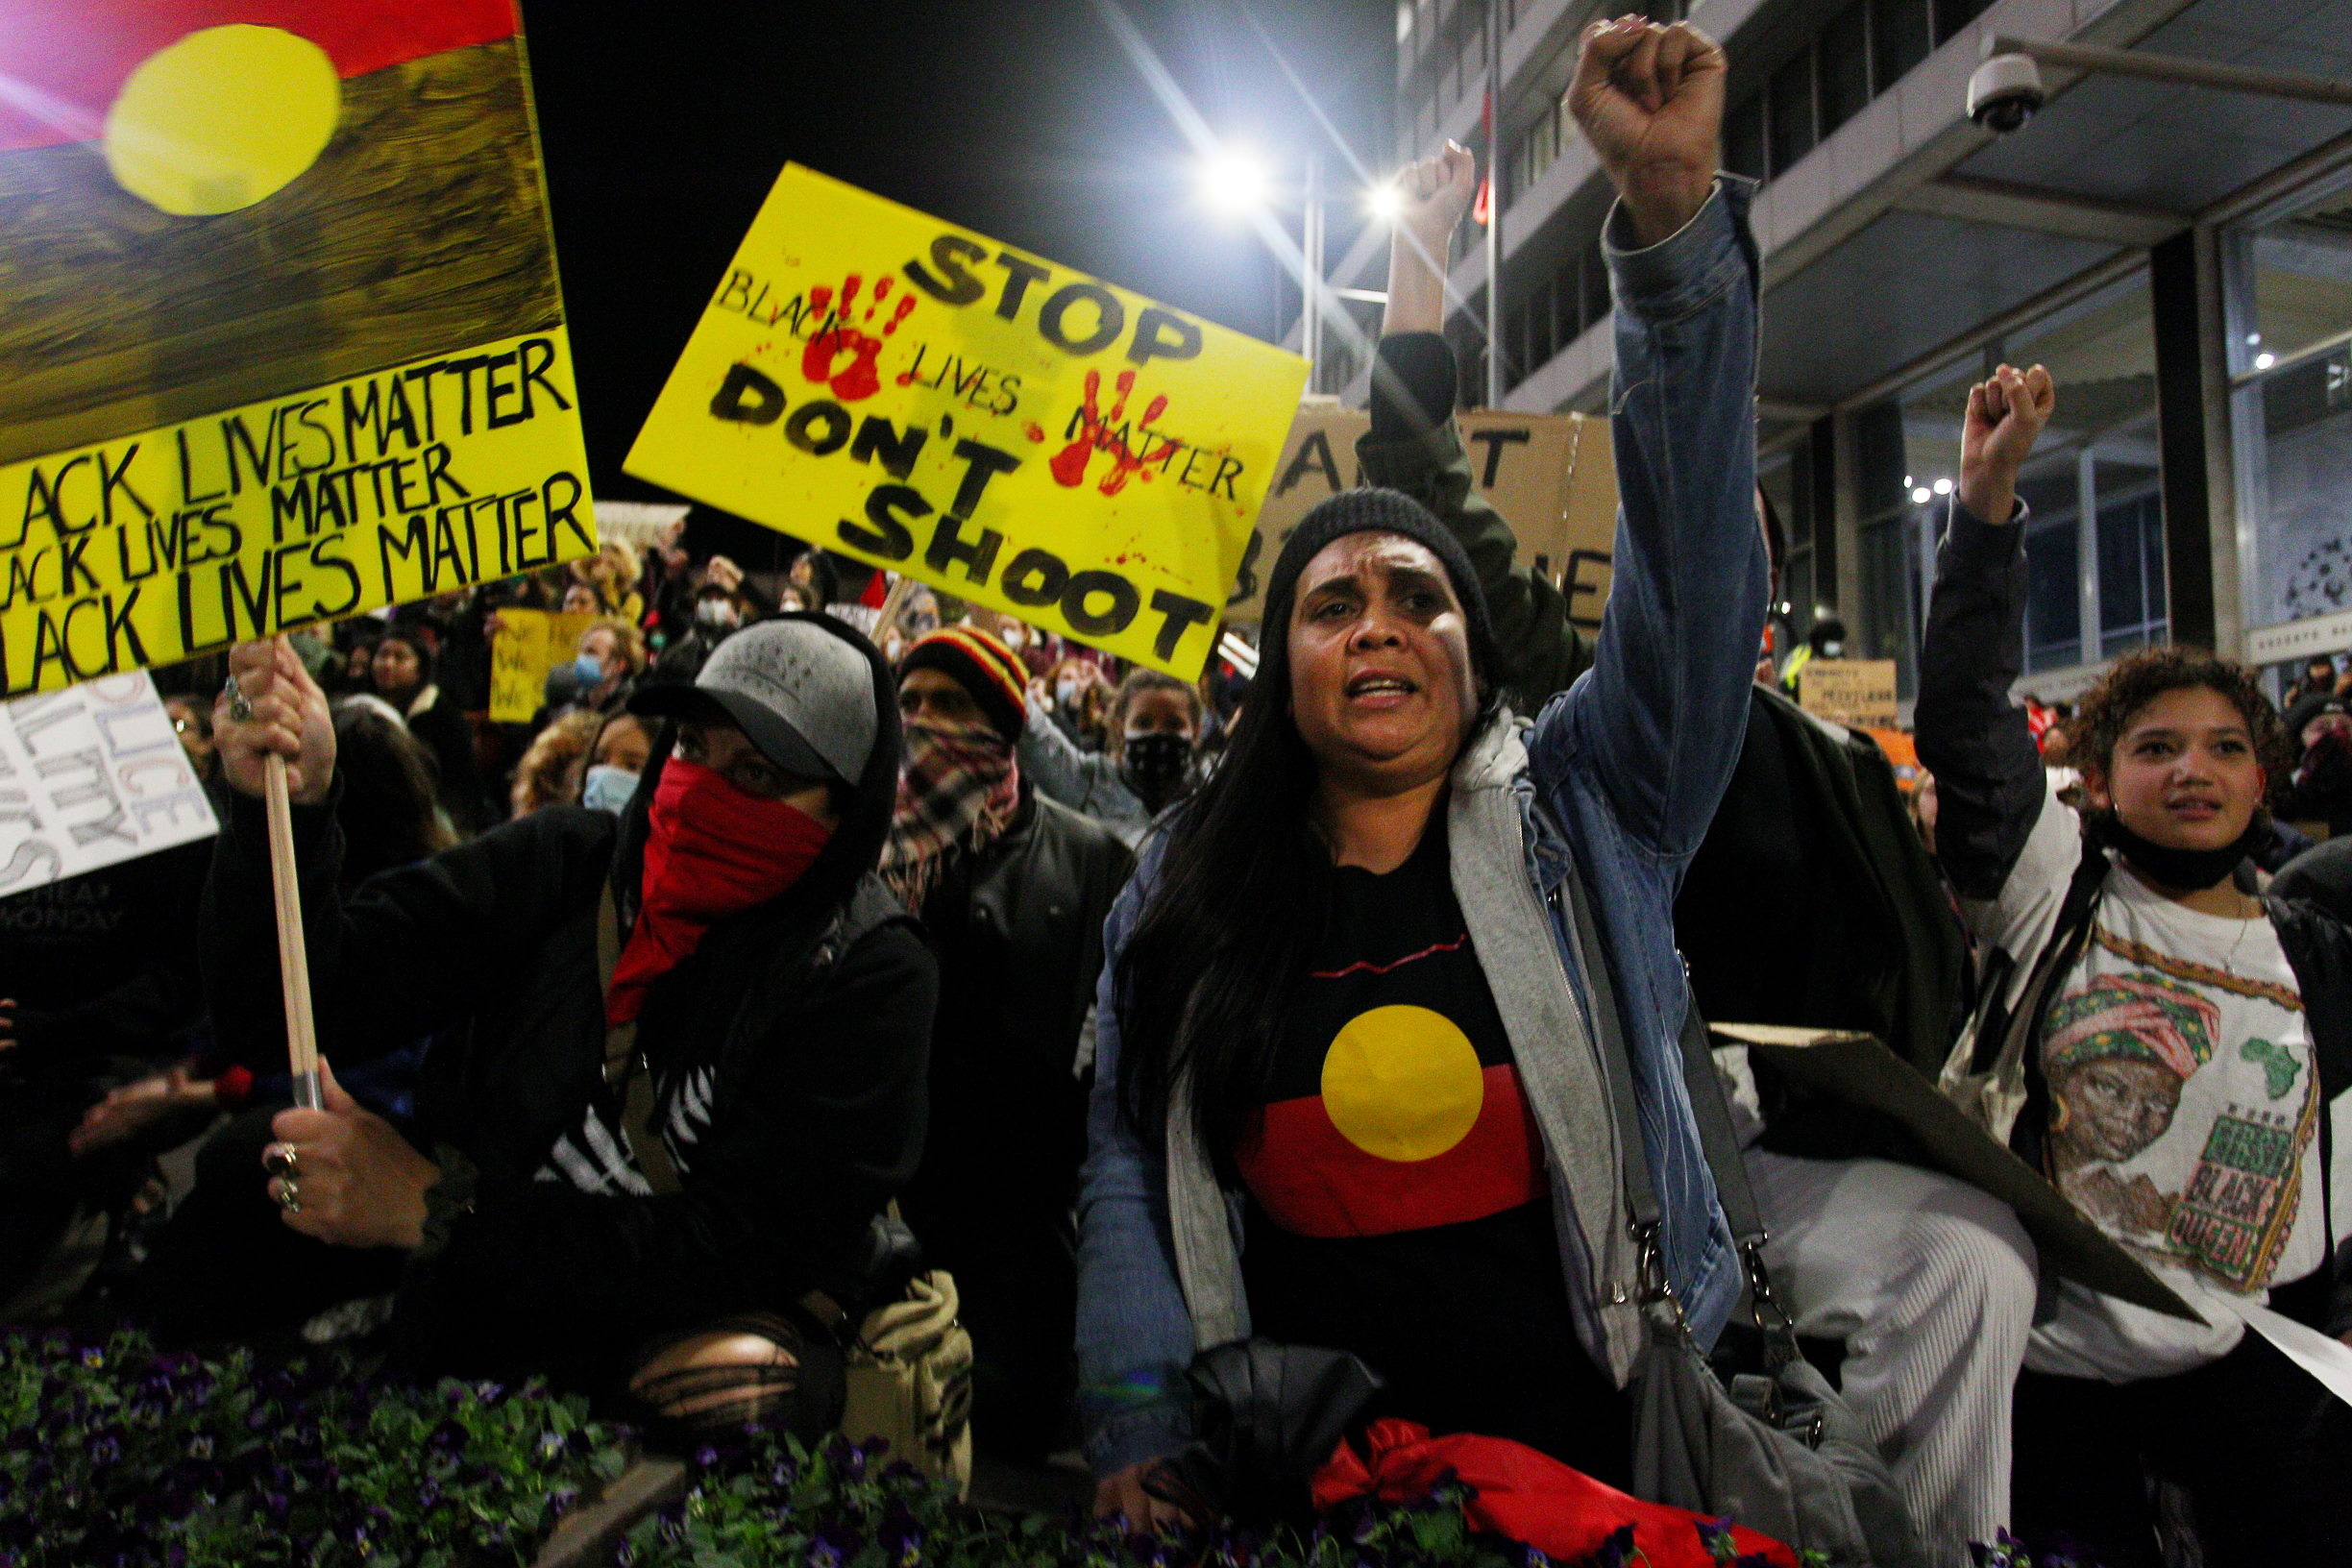 Australia: Black Lives Matter protest must be allowed to take place